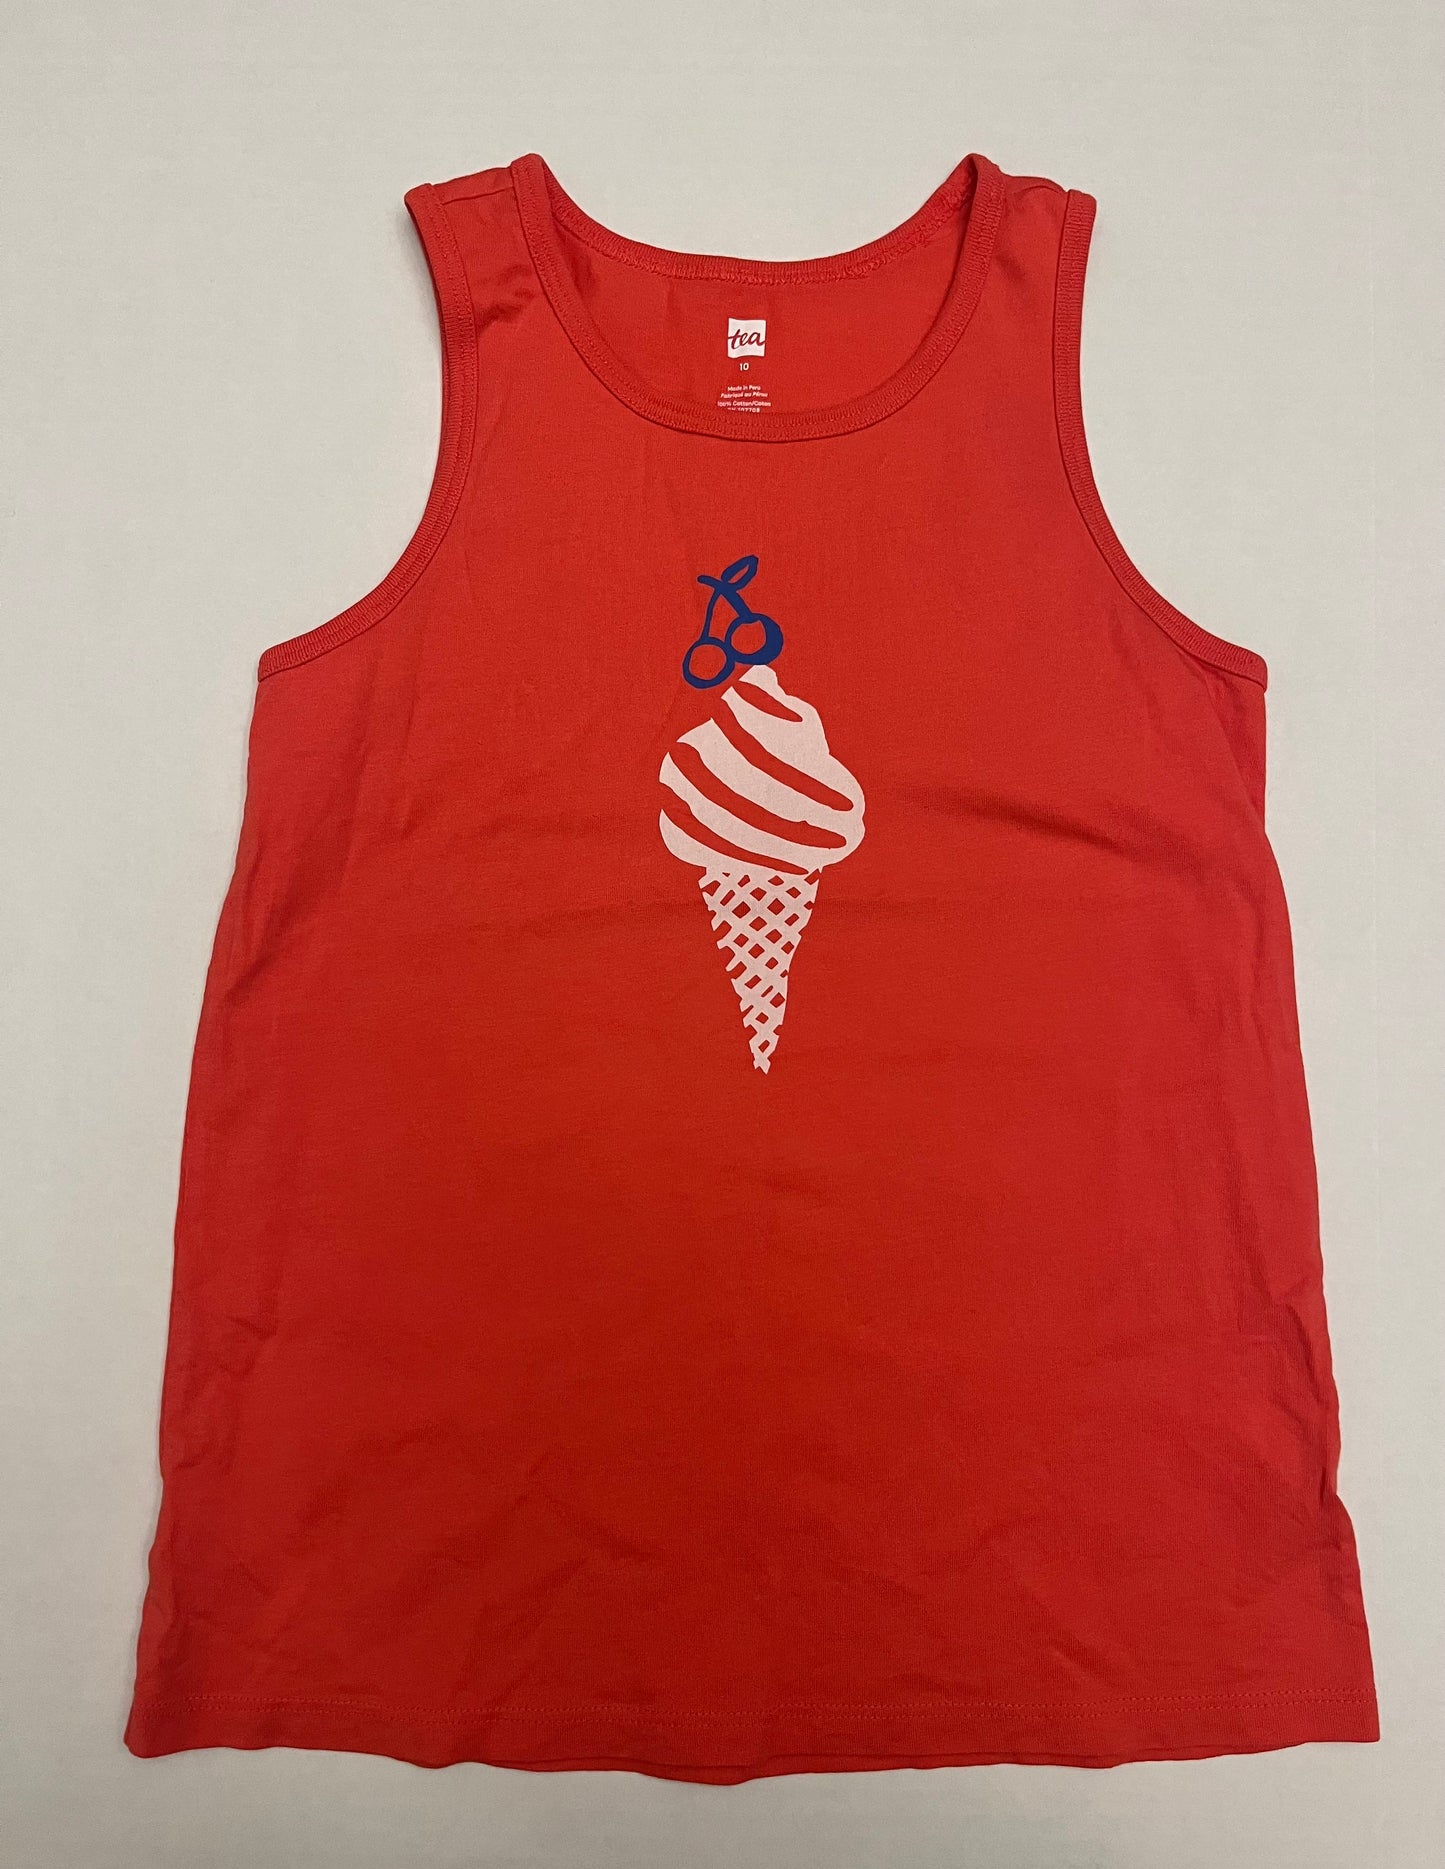 Tea Collection red ice cream tank size 10. PPU Mariemont